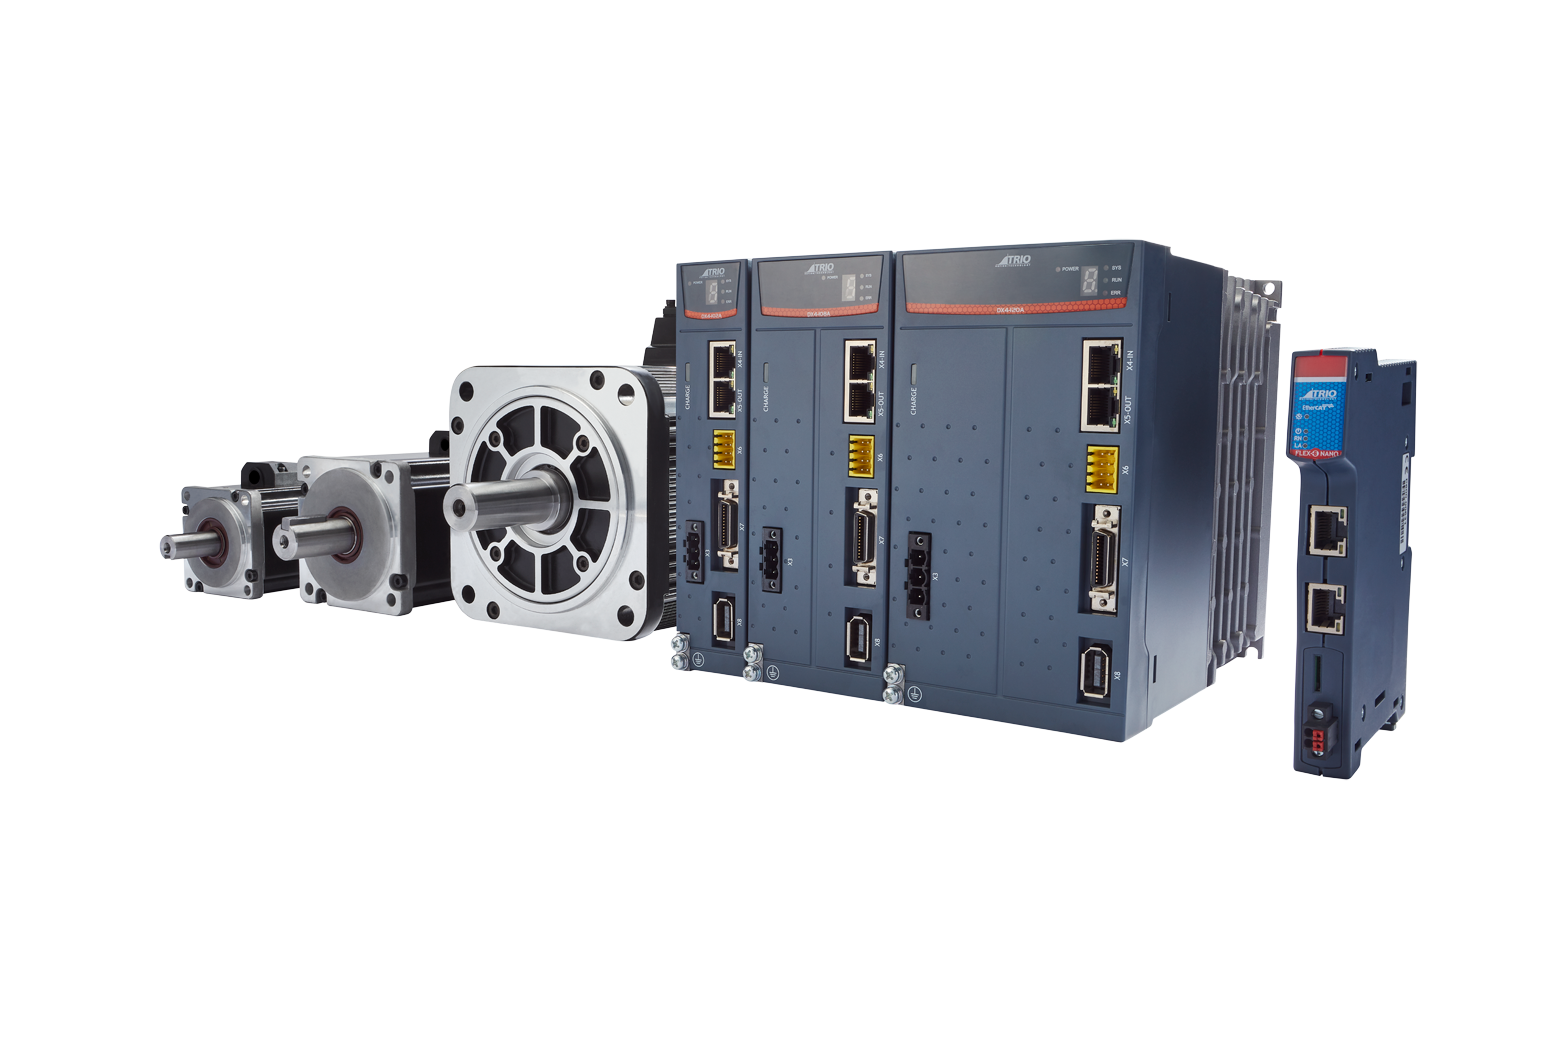 Intelligent Automation Systems now stocks Trio’s servo motor and drive package, as well as controllers including the pocket-sized Flex-6 Nano (right).